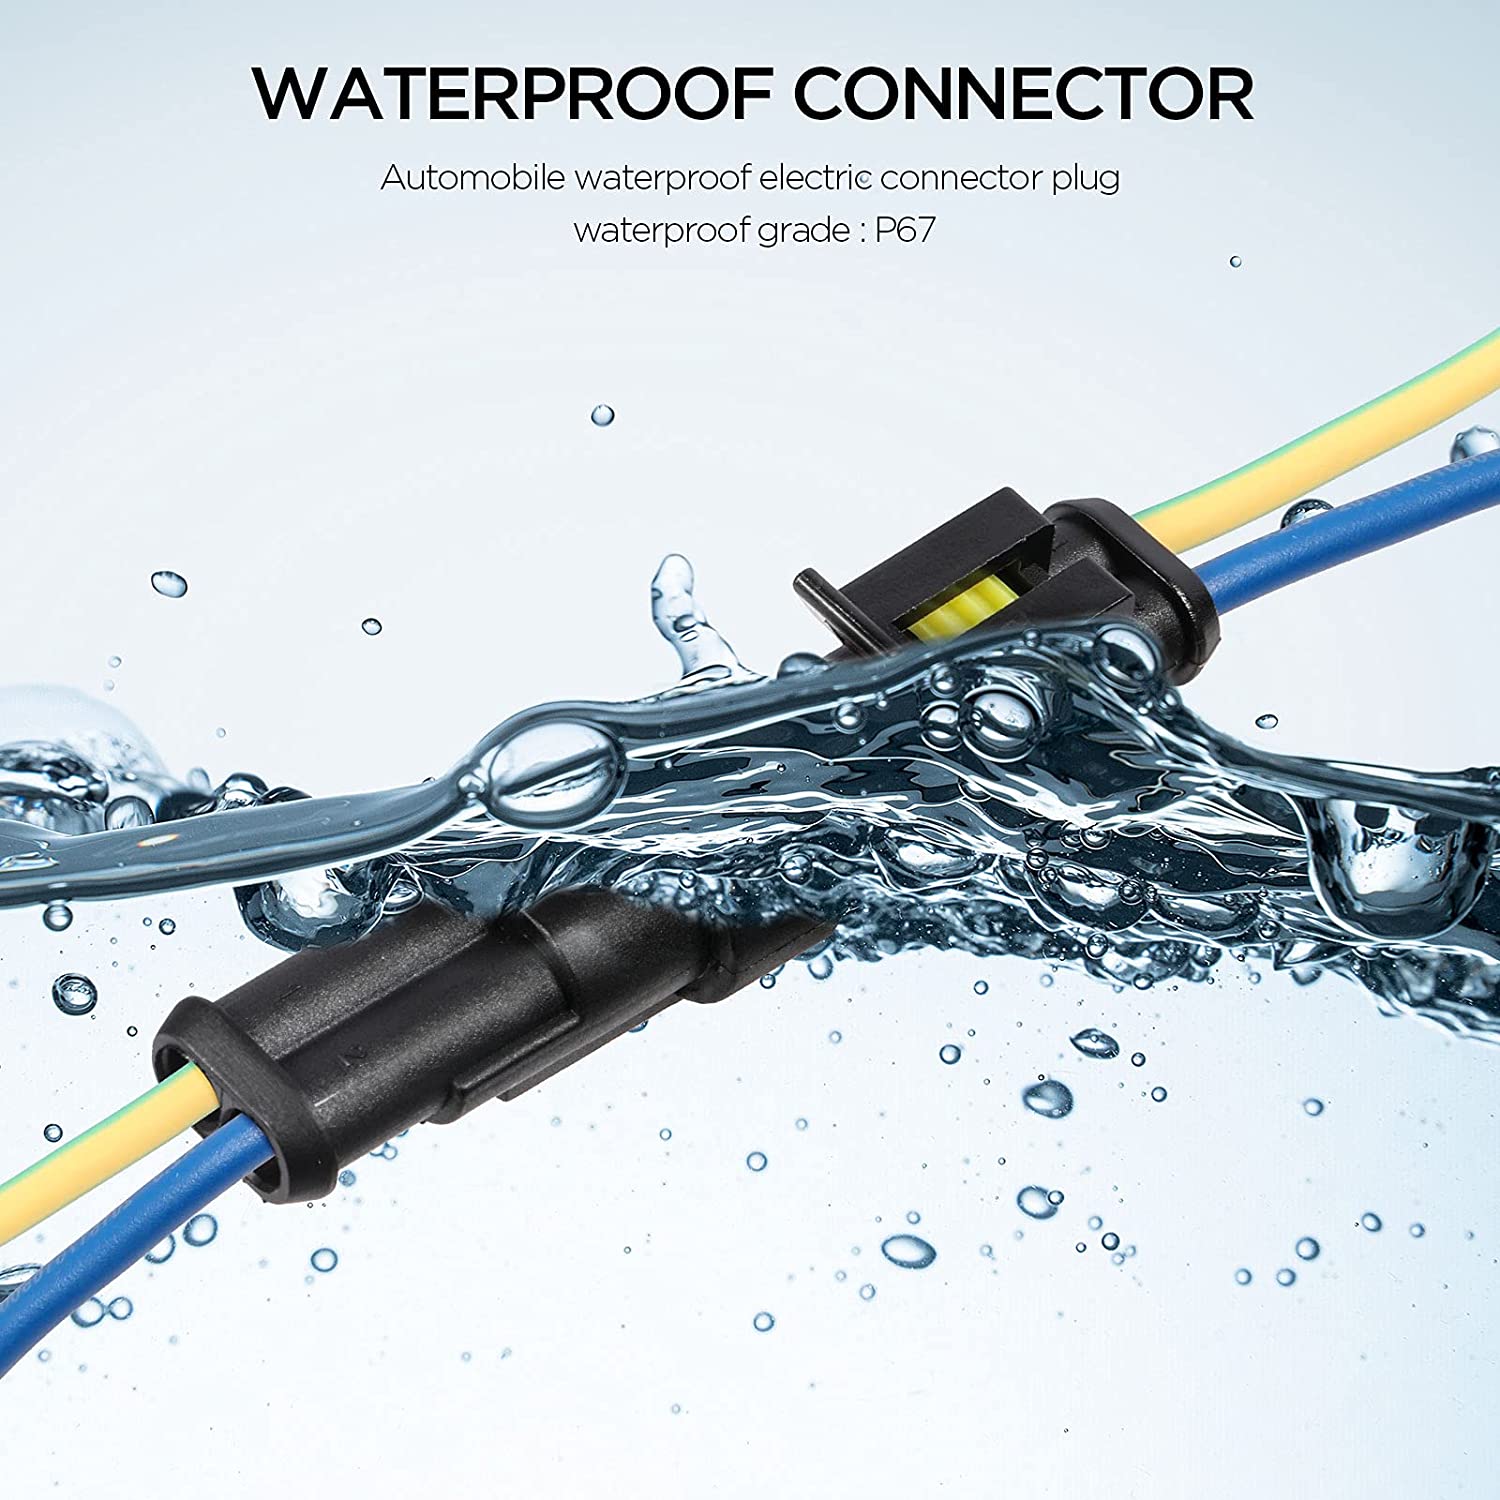 708 Pcs 43 Kits Waterproof Plug Connectors, Automotive Electrical Connector  Kit Terminals Plug Car, Waterproof 1 2 3 4 5 6 Pin Electrical Wire